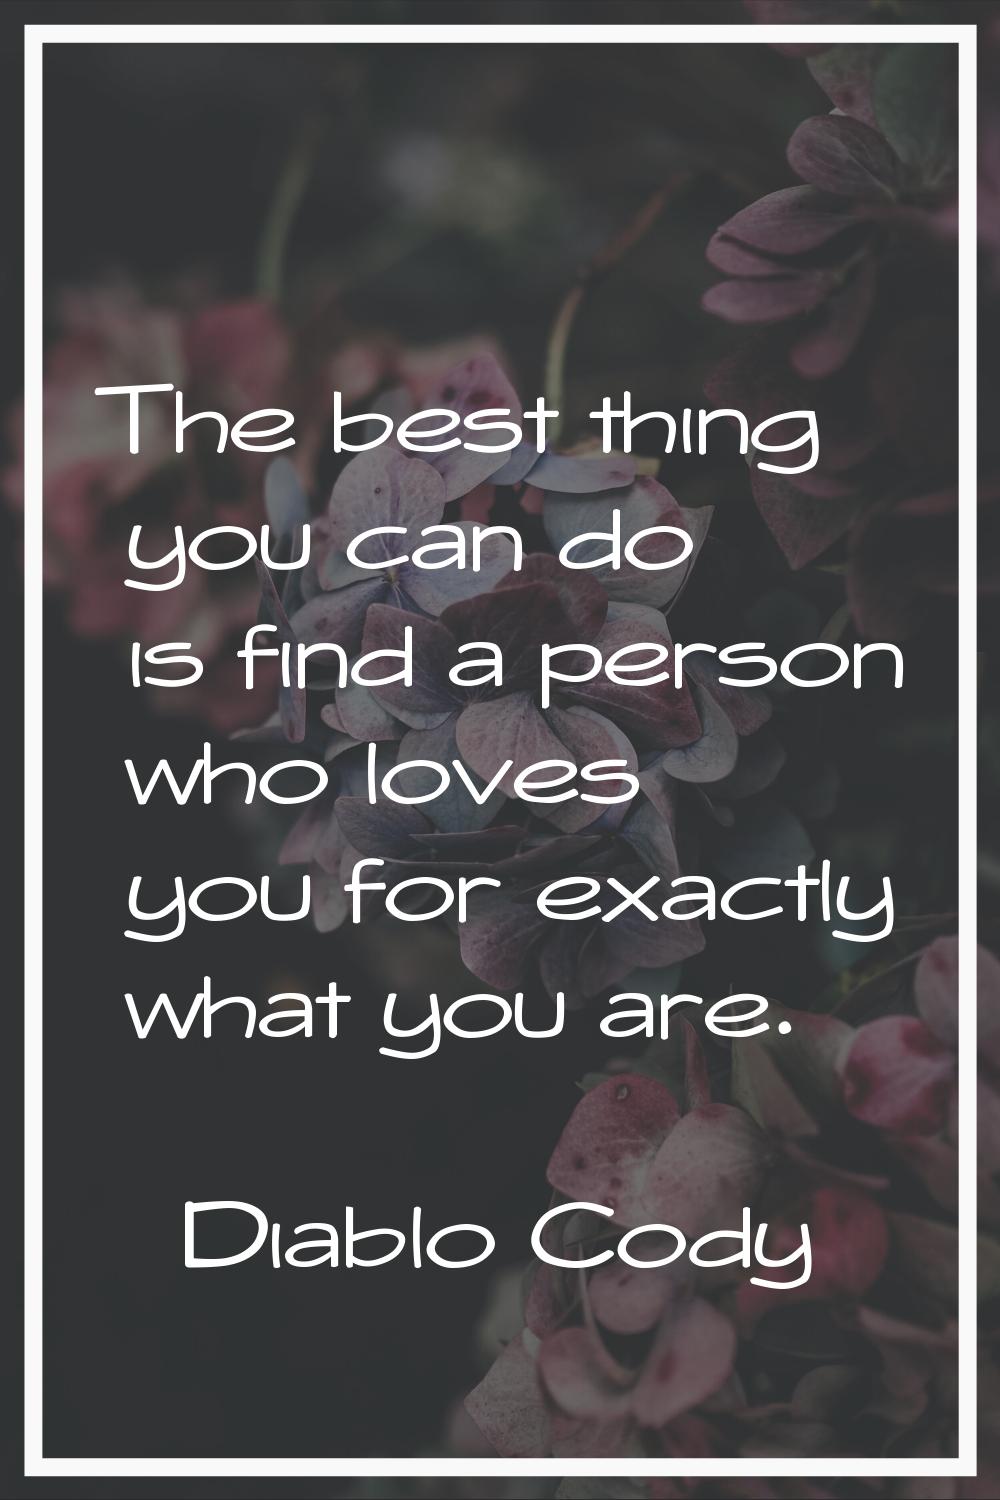 The best thing you can do is find a person who loves you for exactly what you are.